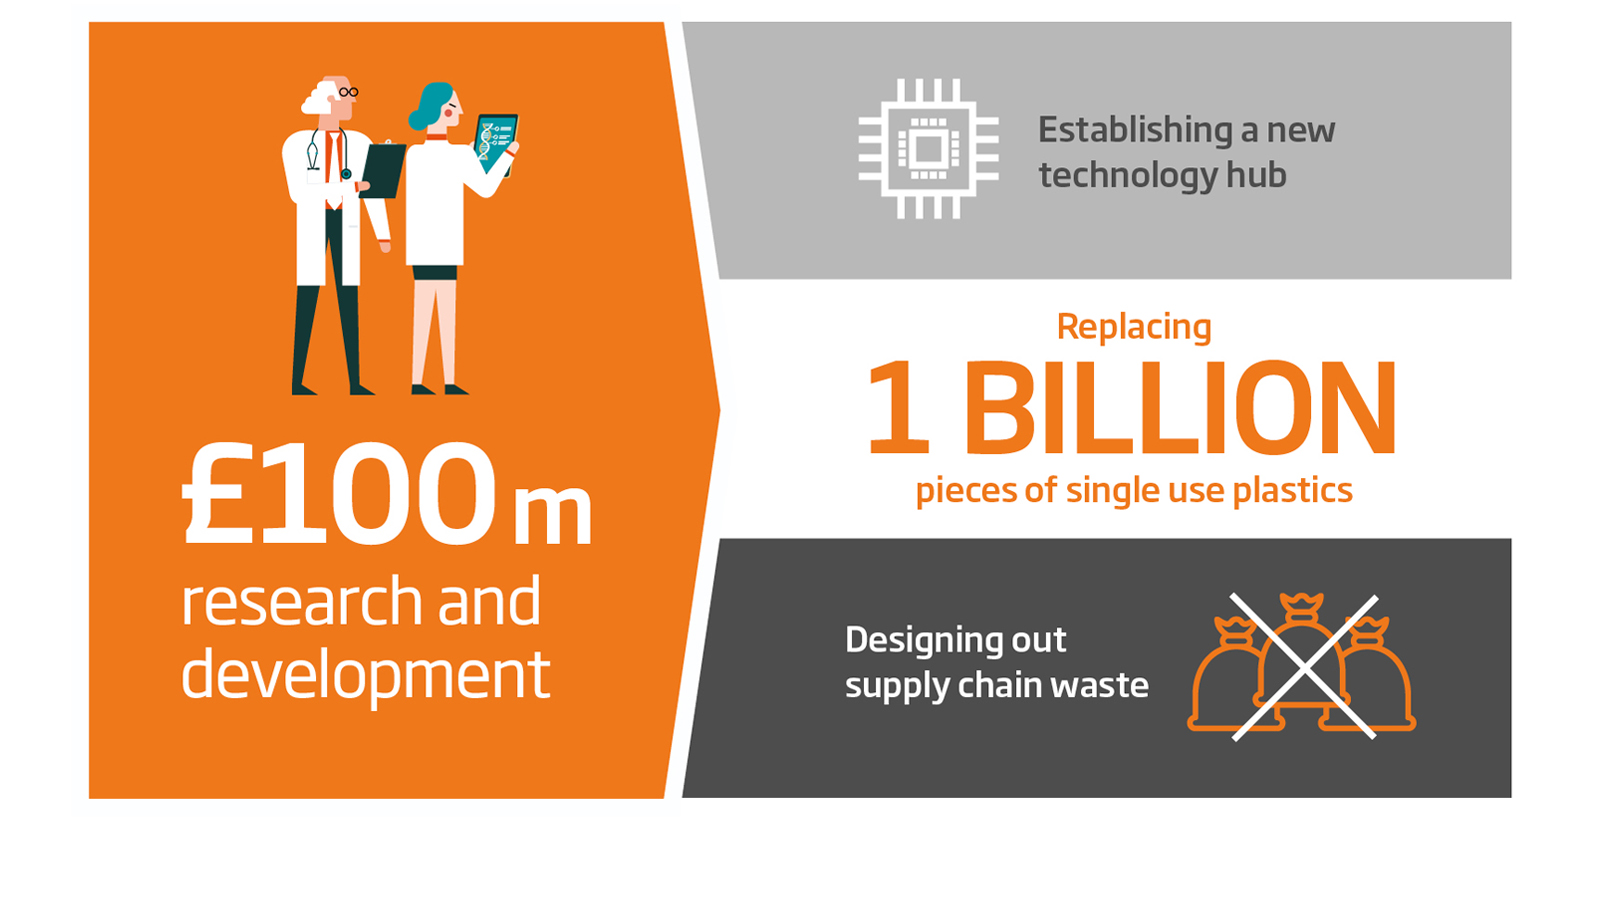 We're accelerating our work in the Circular Economy with a £100m R&D investment over 5 years